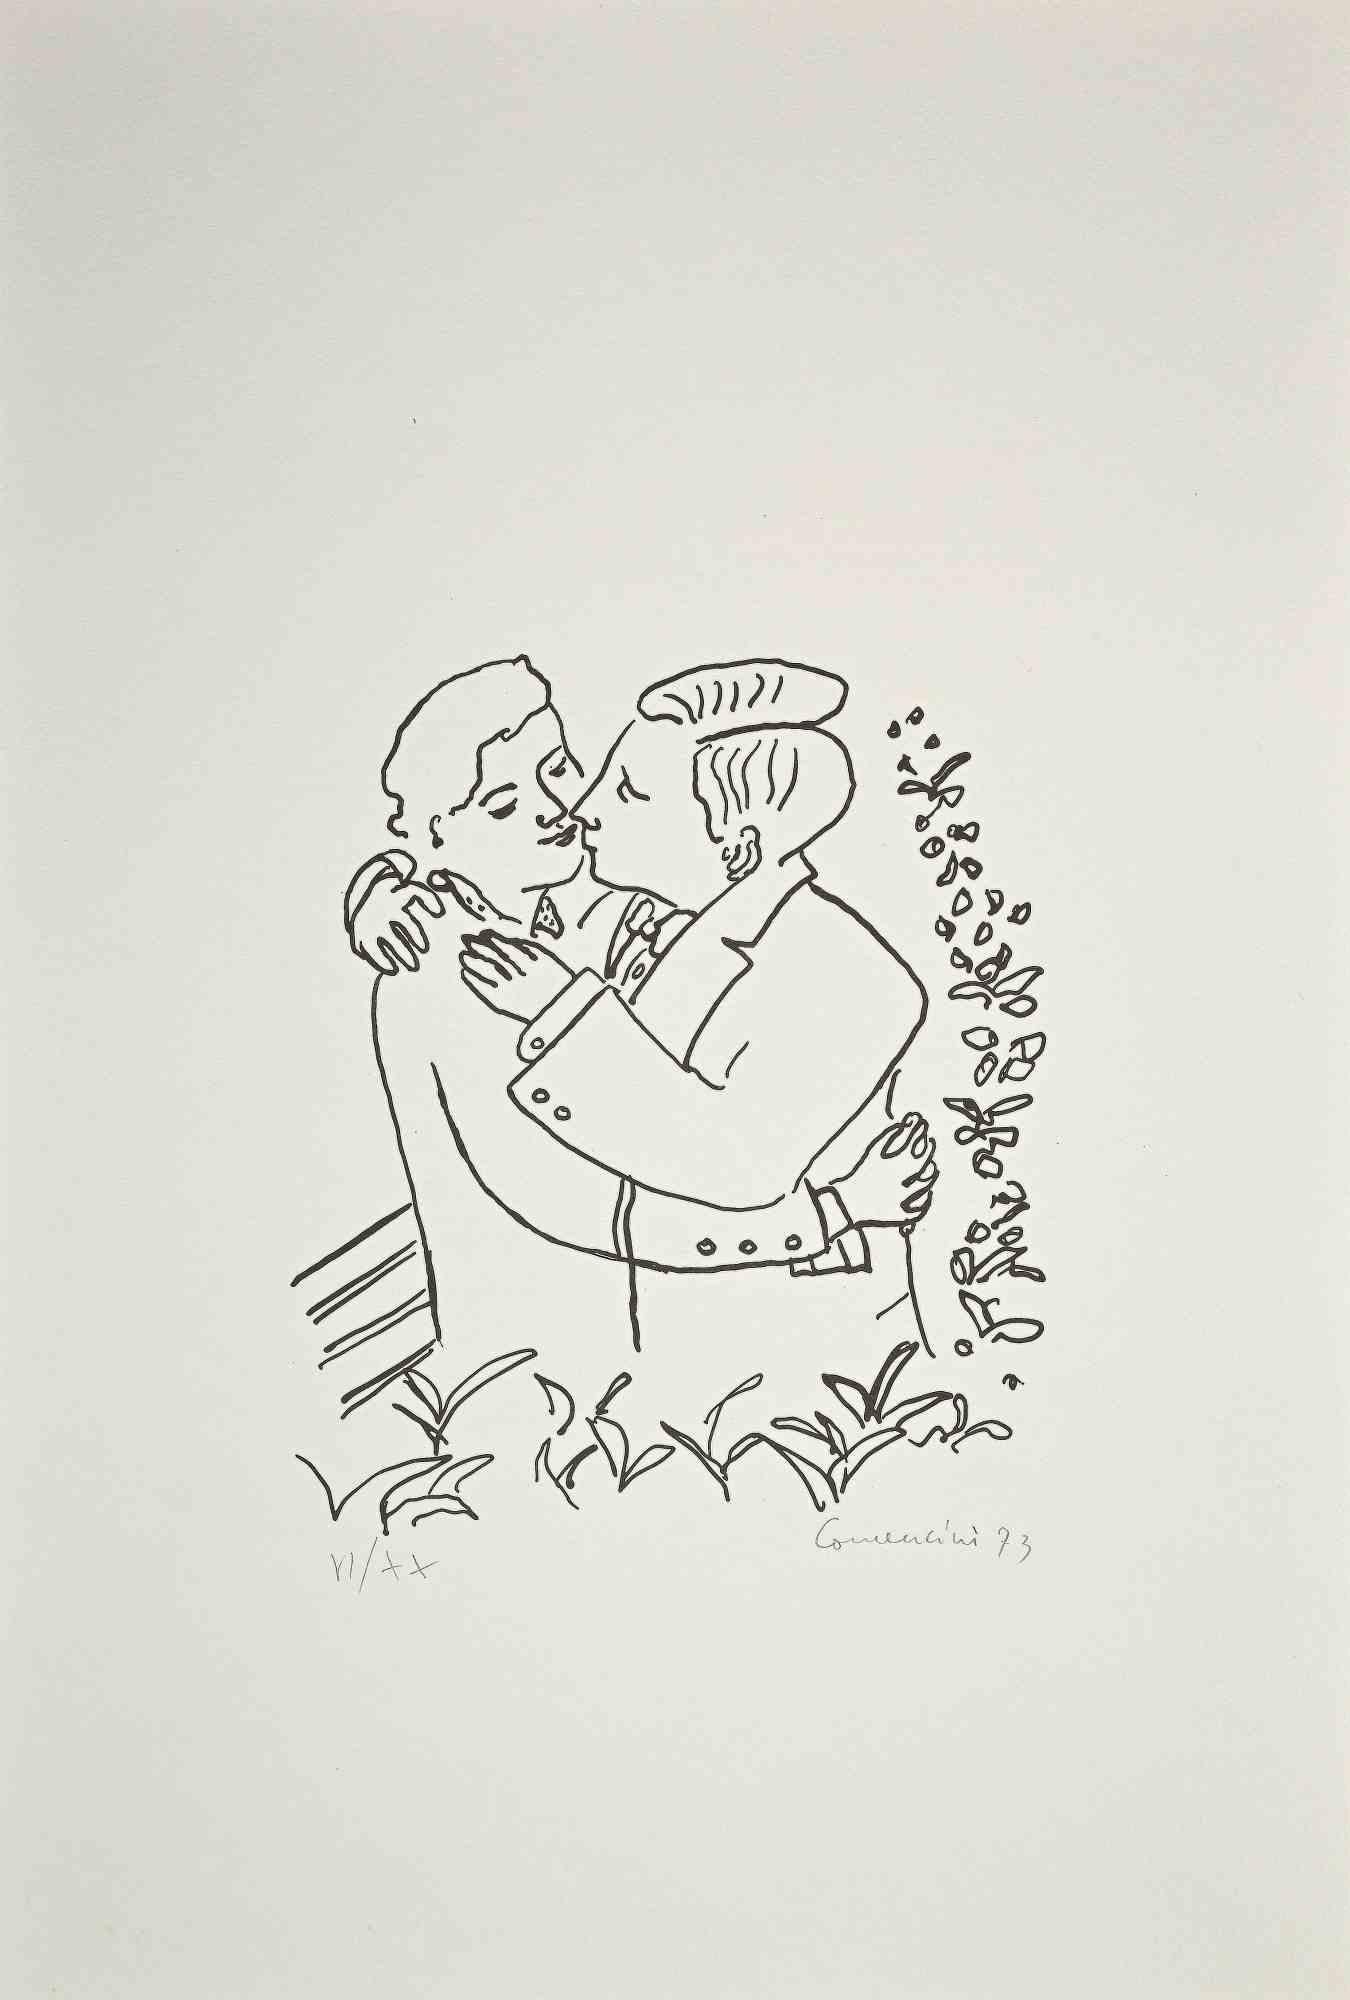 The Couple is an original etching and drypoint on paper, realized by the Italian artist Eugenio Comencini.

In good condition.

Hand-signed.

Numbered. Edition, VI/XX.

This contemporary piece is depicted through strong lines and intense black and